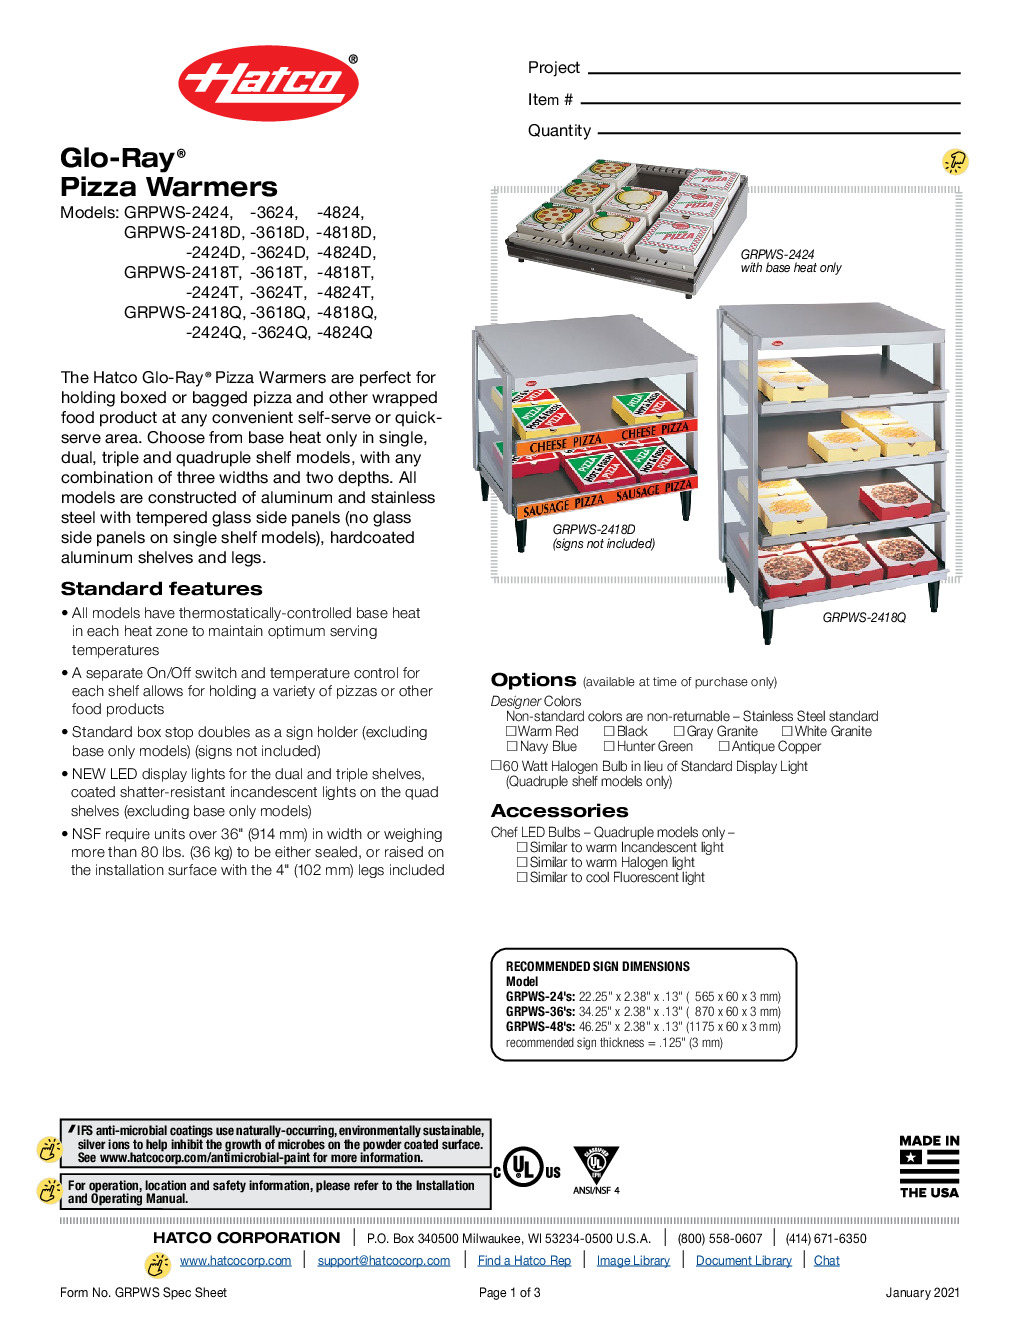 Hatco GRPWS-3618D For Multi-Product Heated Display Merchandiser